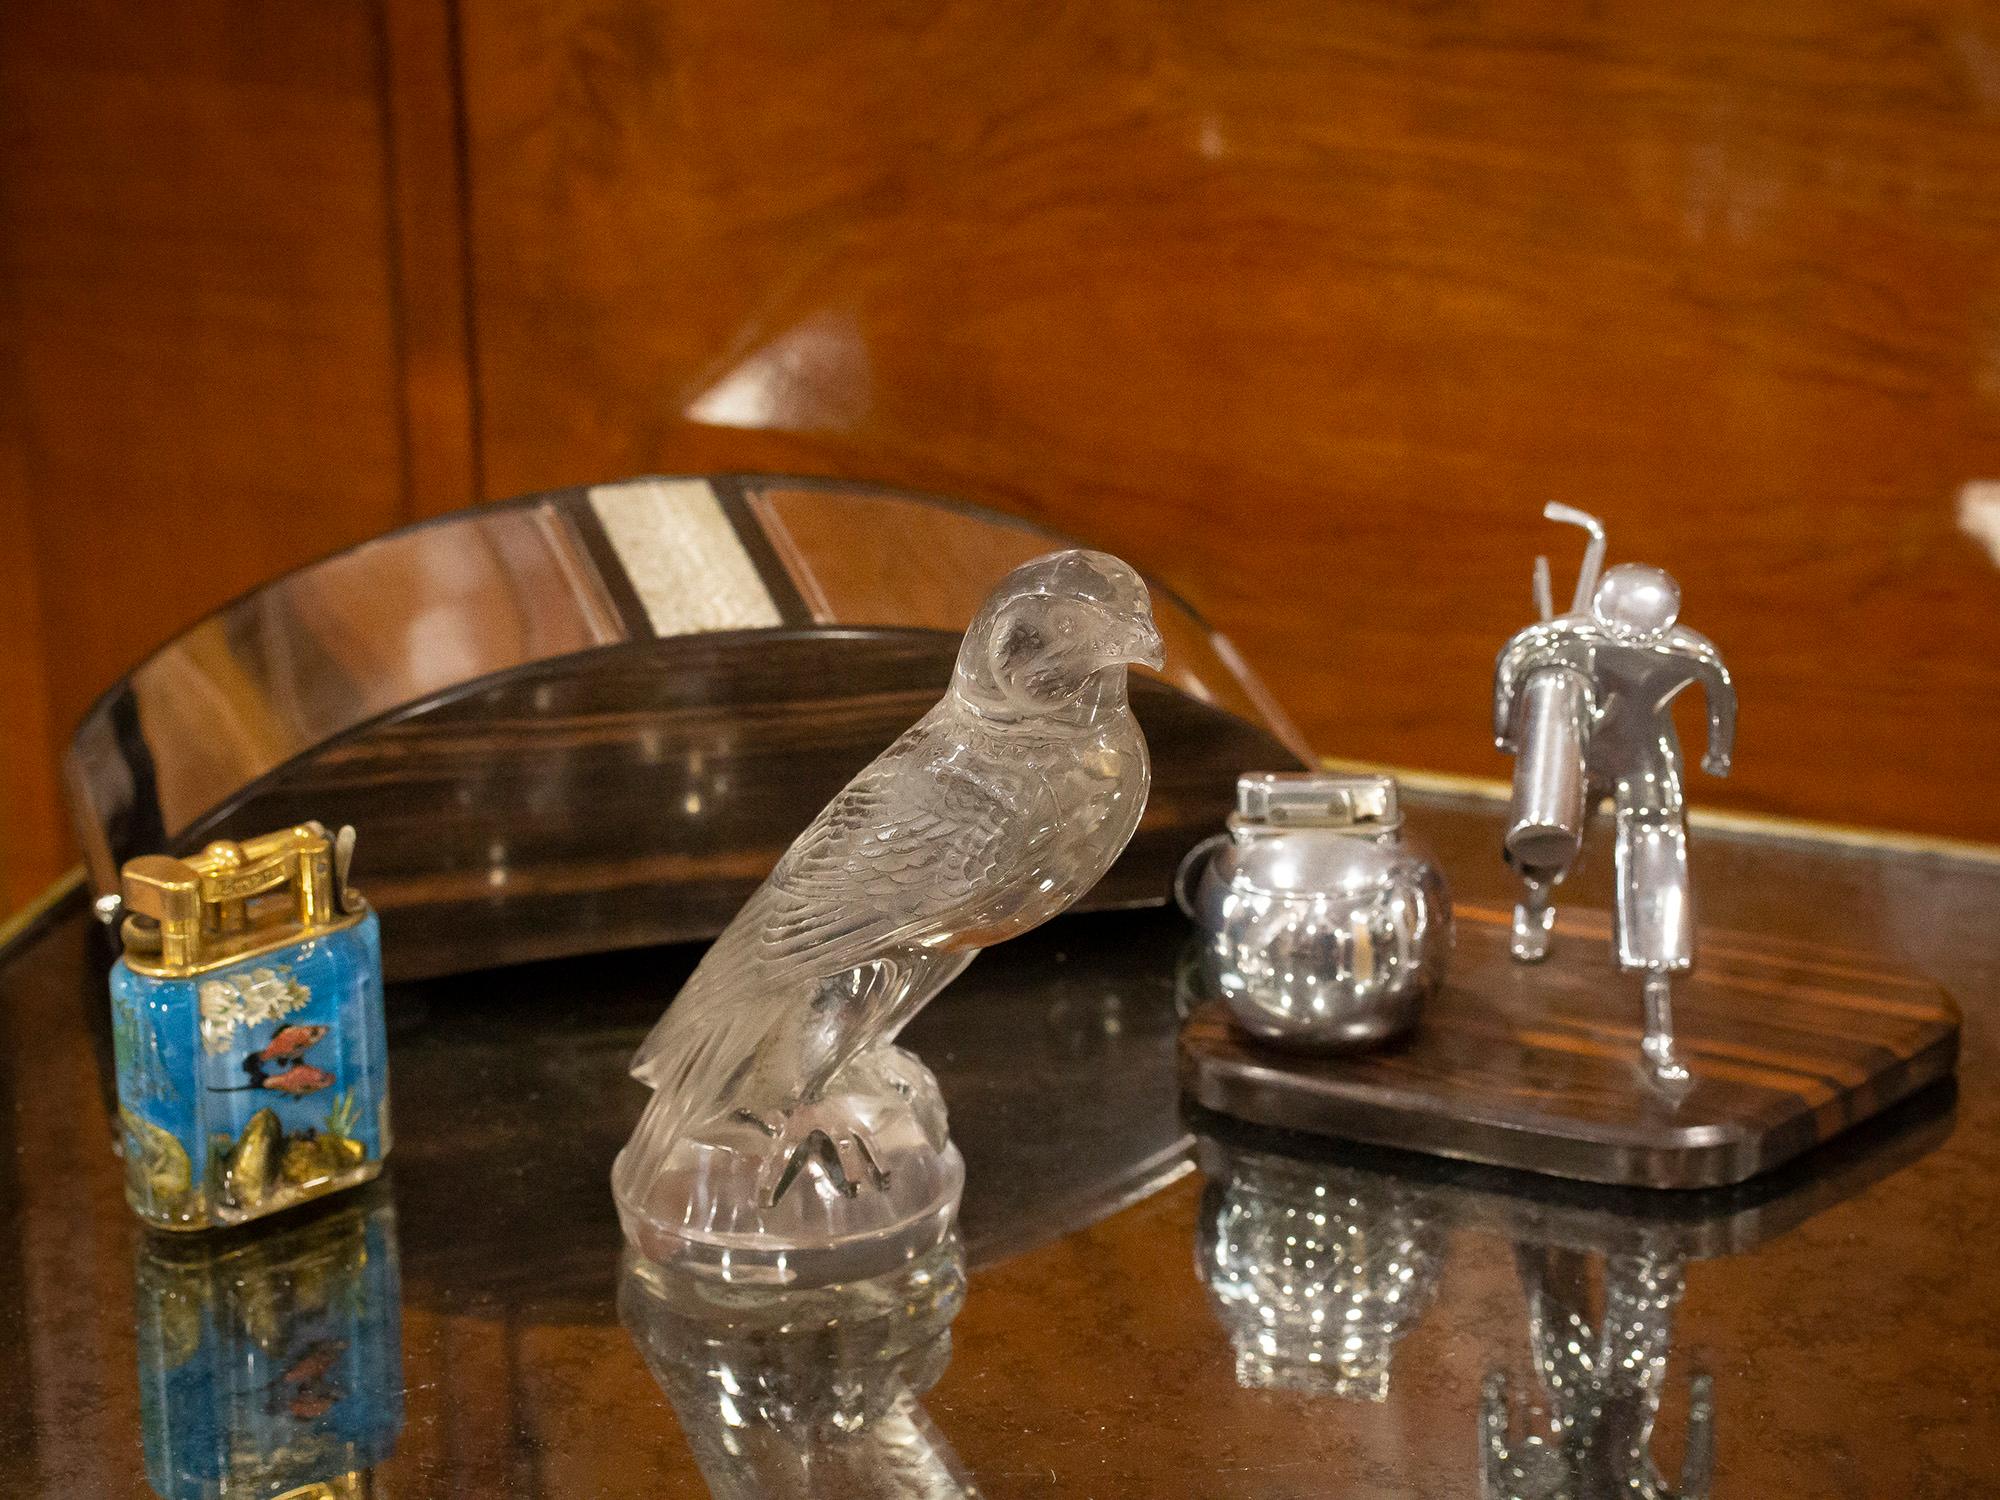 Original Rene Lalique Car Mascot #1124 Bouchon de Radiateur Faucon

From our Rene Lalique collection, we are delighted to offer this stunning French Rene Lalique Falcon (Faucon) car mascot. The car mascot modelled as a Falcon perched upon a rock